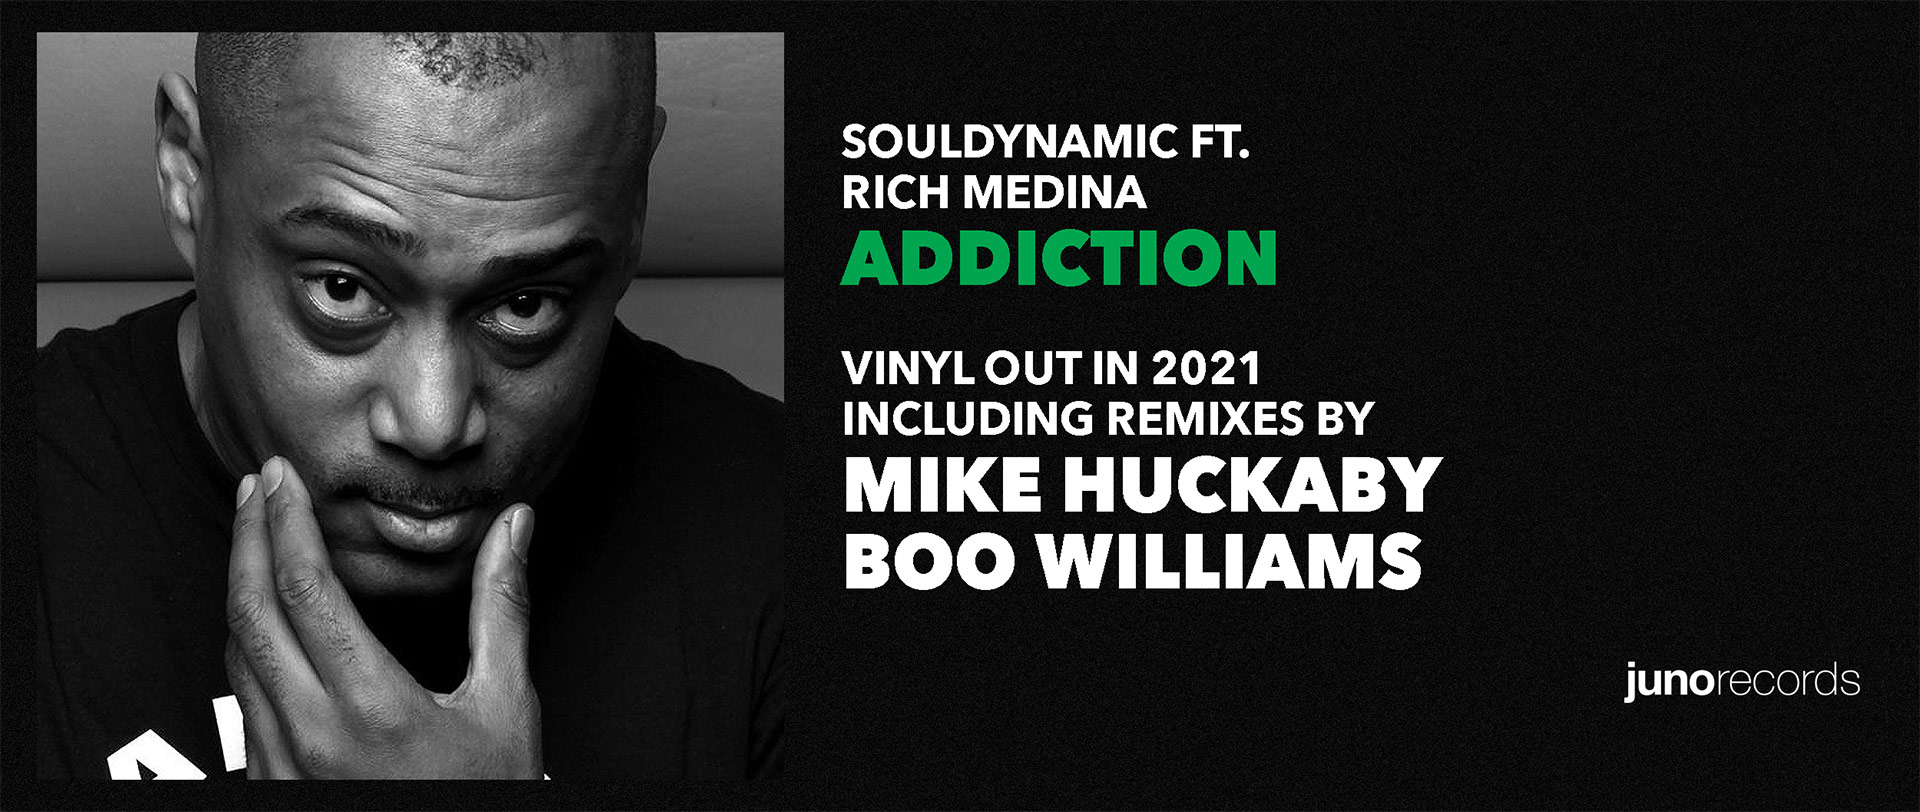 Addiction Remixes, Vinyl OUT IN 2021, incl Mike Huckaby Rmx